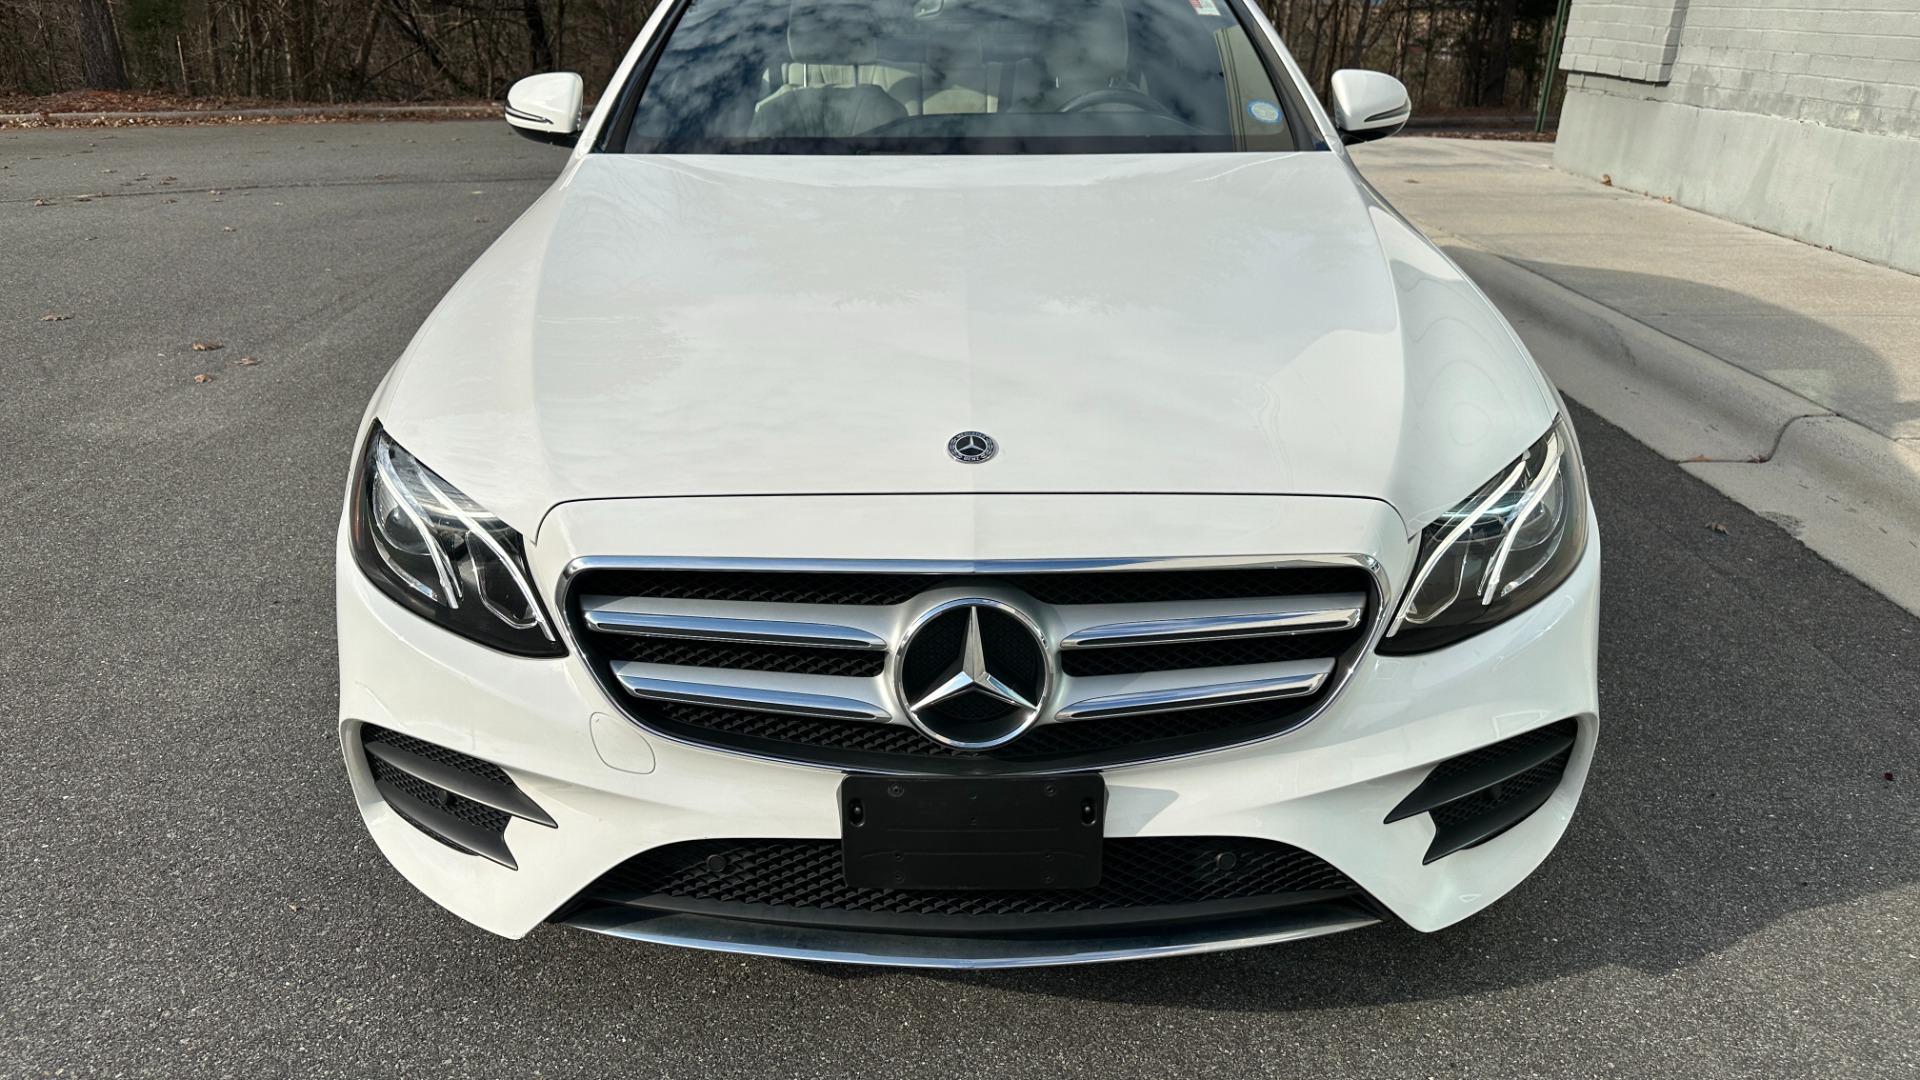 Used 2019 Mercedes-Benz E-Class E300 / PREMIUM PACKAGE / BLIND SPOT / BURMESTER SOUND / HEATED STEERING for sale $41,495 at Formula Imports in Charlotte NC 28227 8